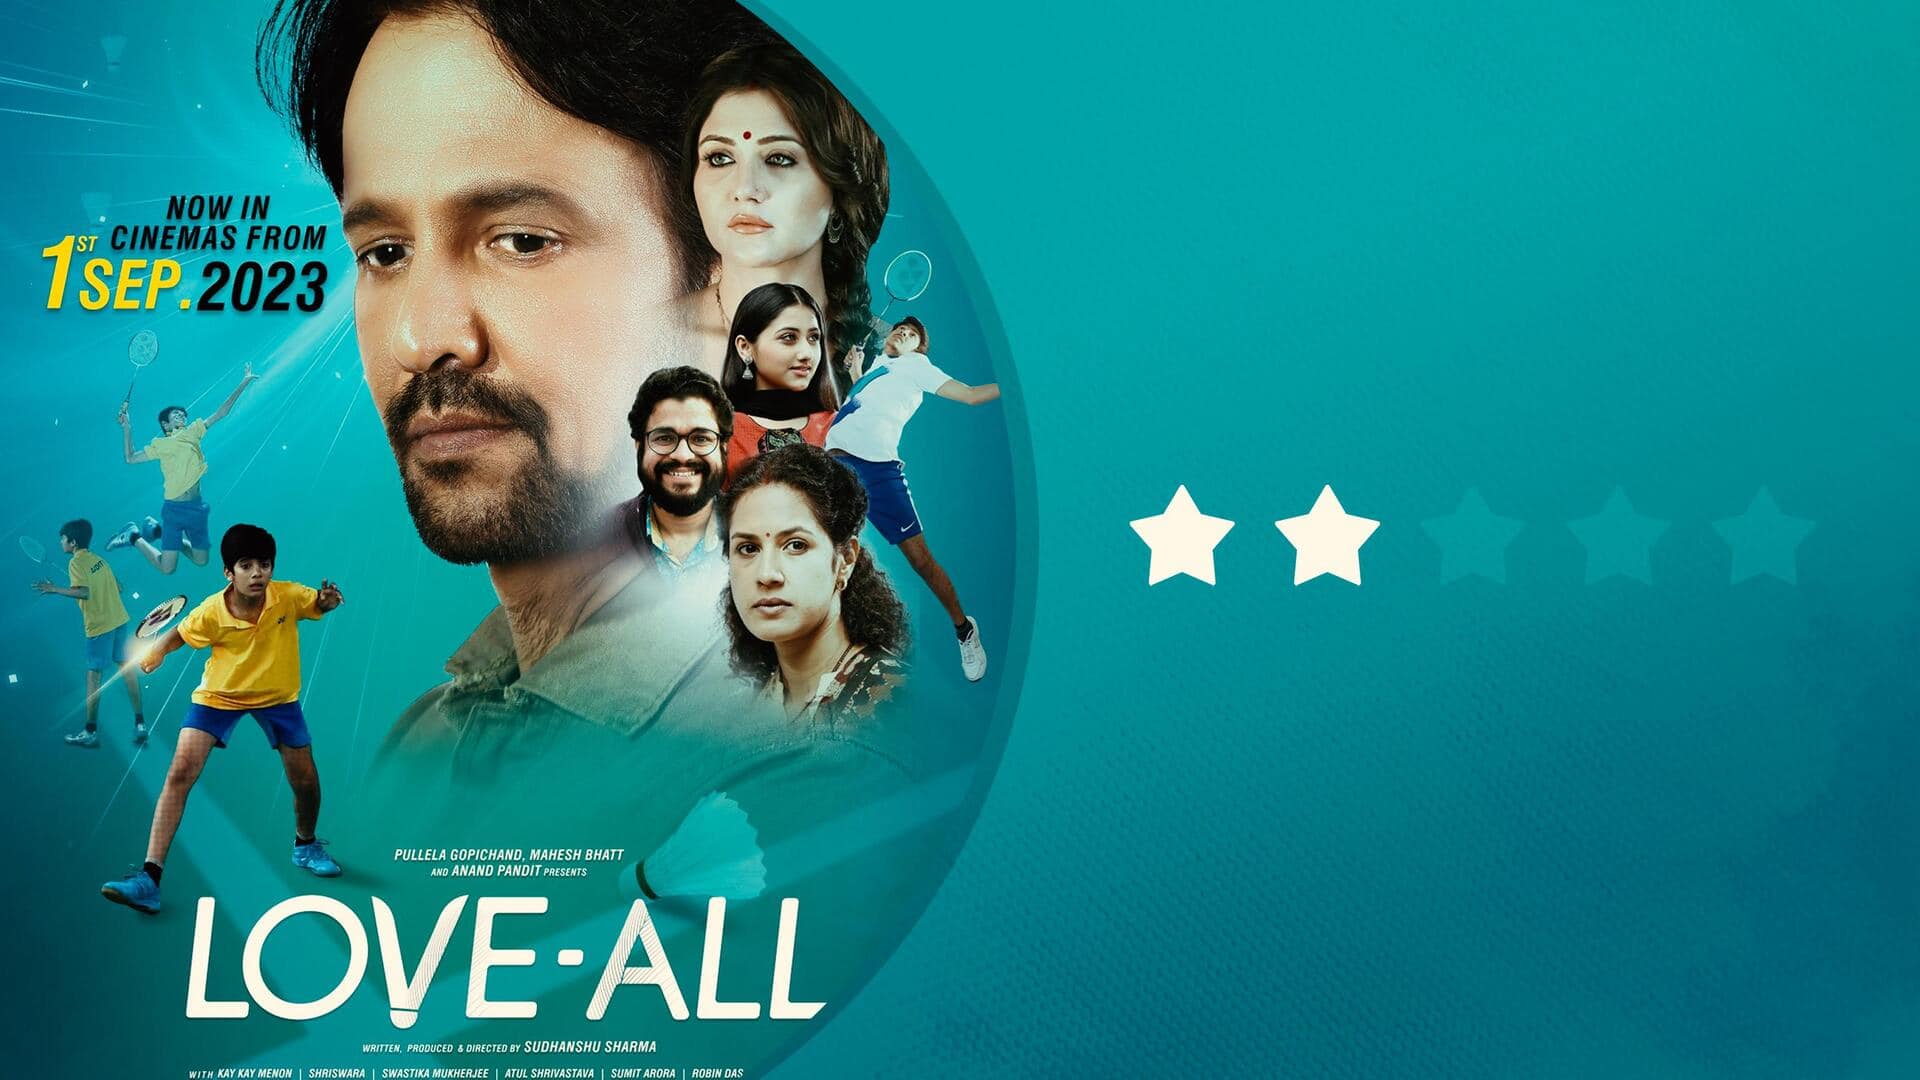 #Love-AllReview: Kay Kay Menon's simple sports drama needed better execution